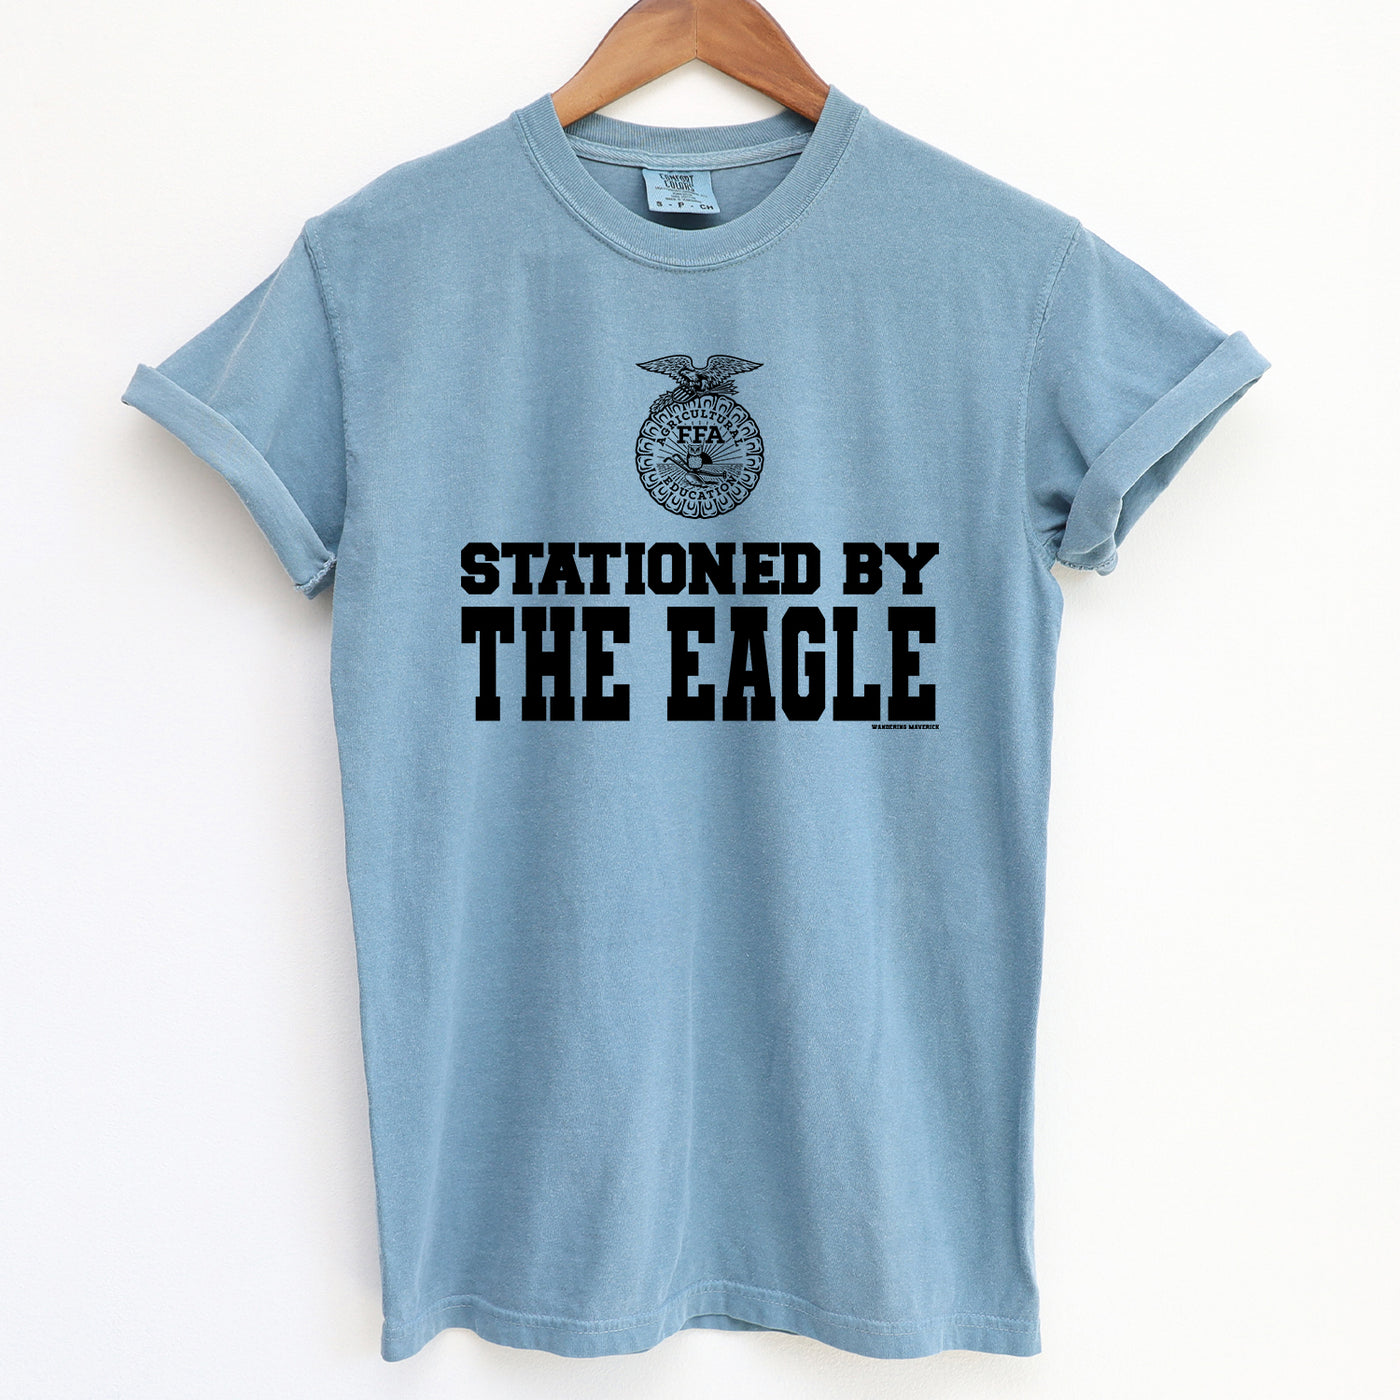 Stationed By The eAGLE FFA ComfortWash/ComfortColor T-Shirt (S-4XL) - Multiple Colors!